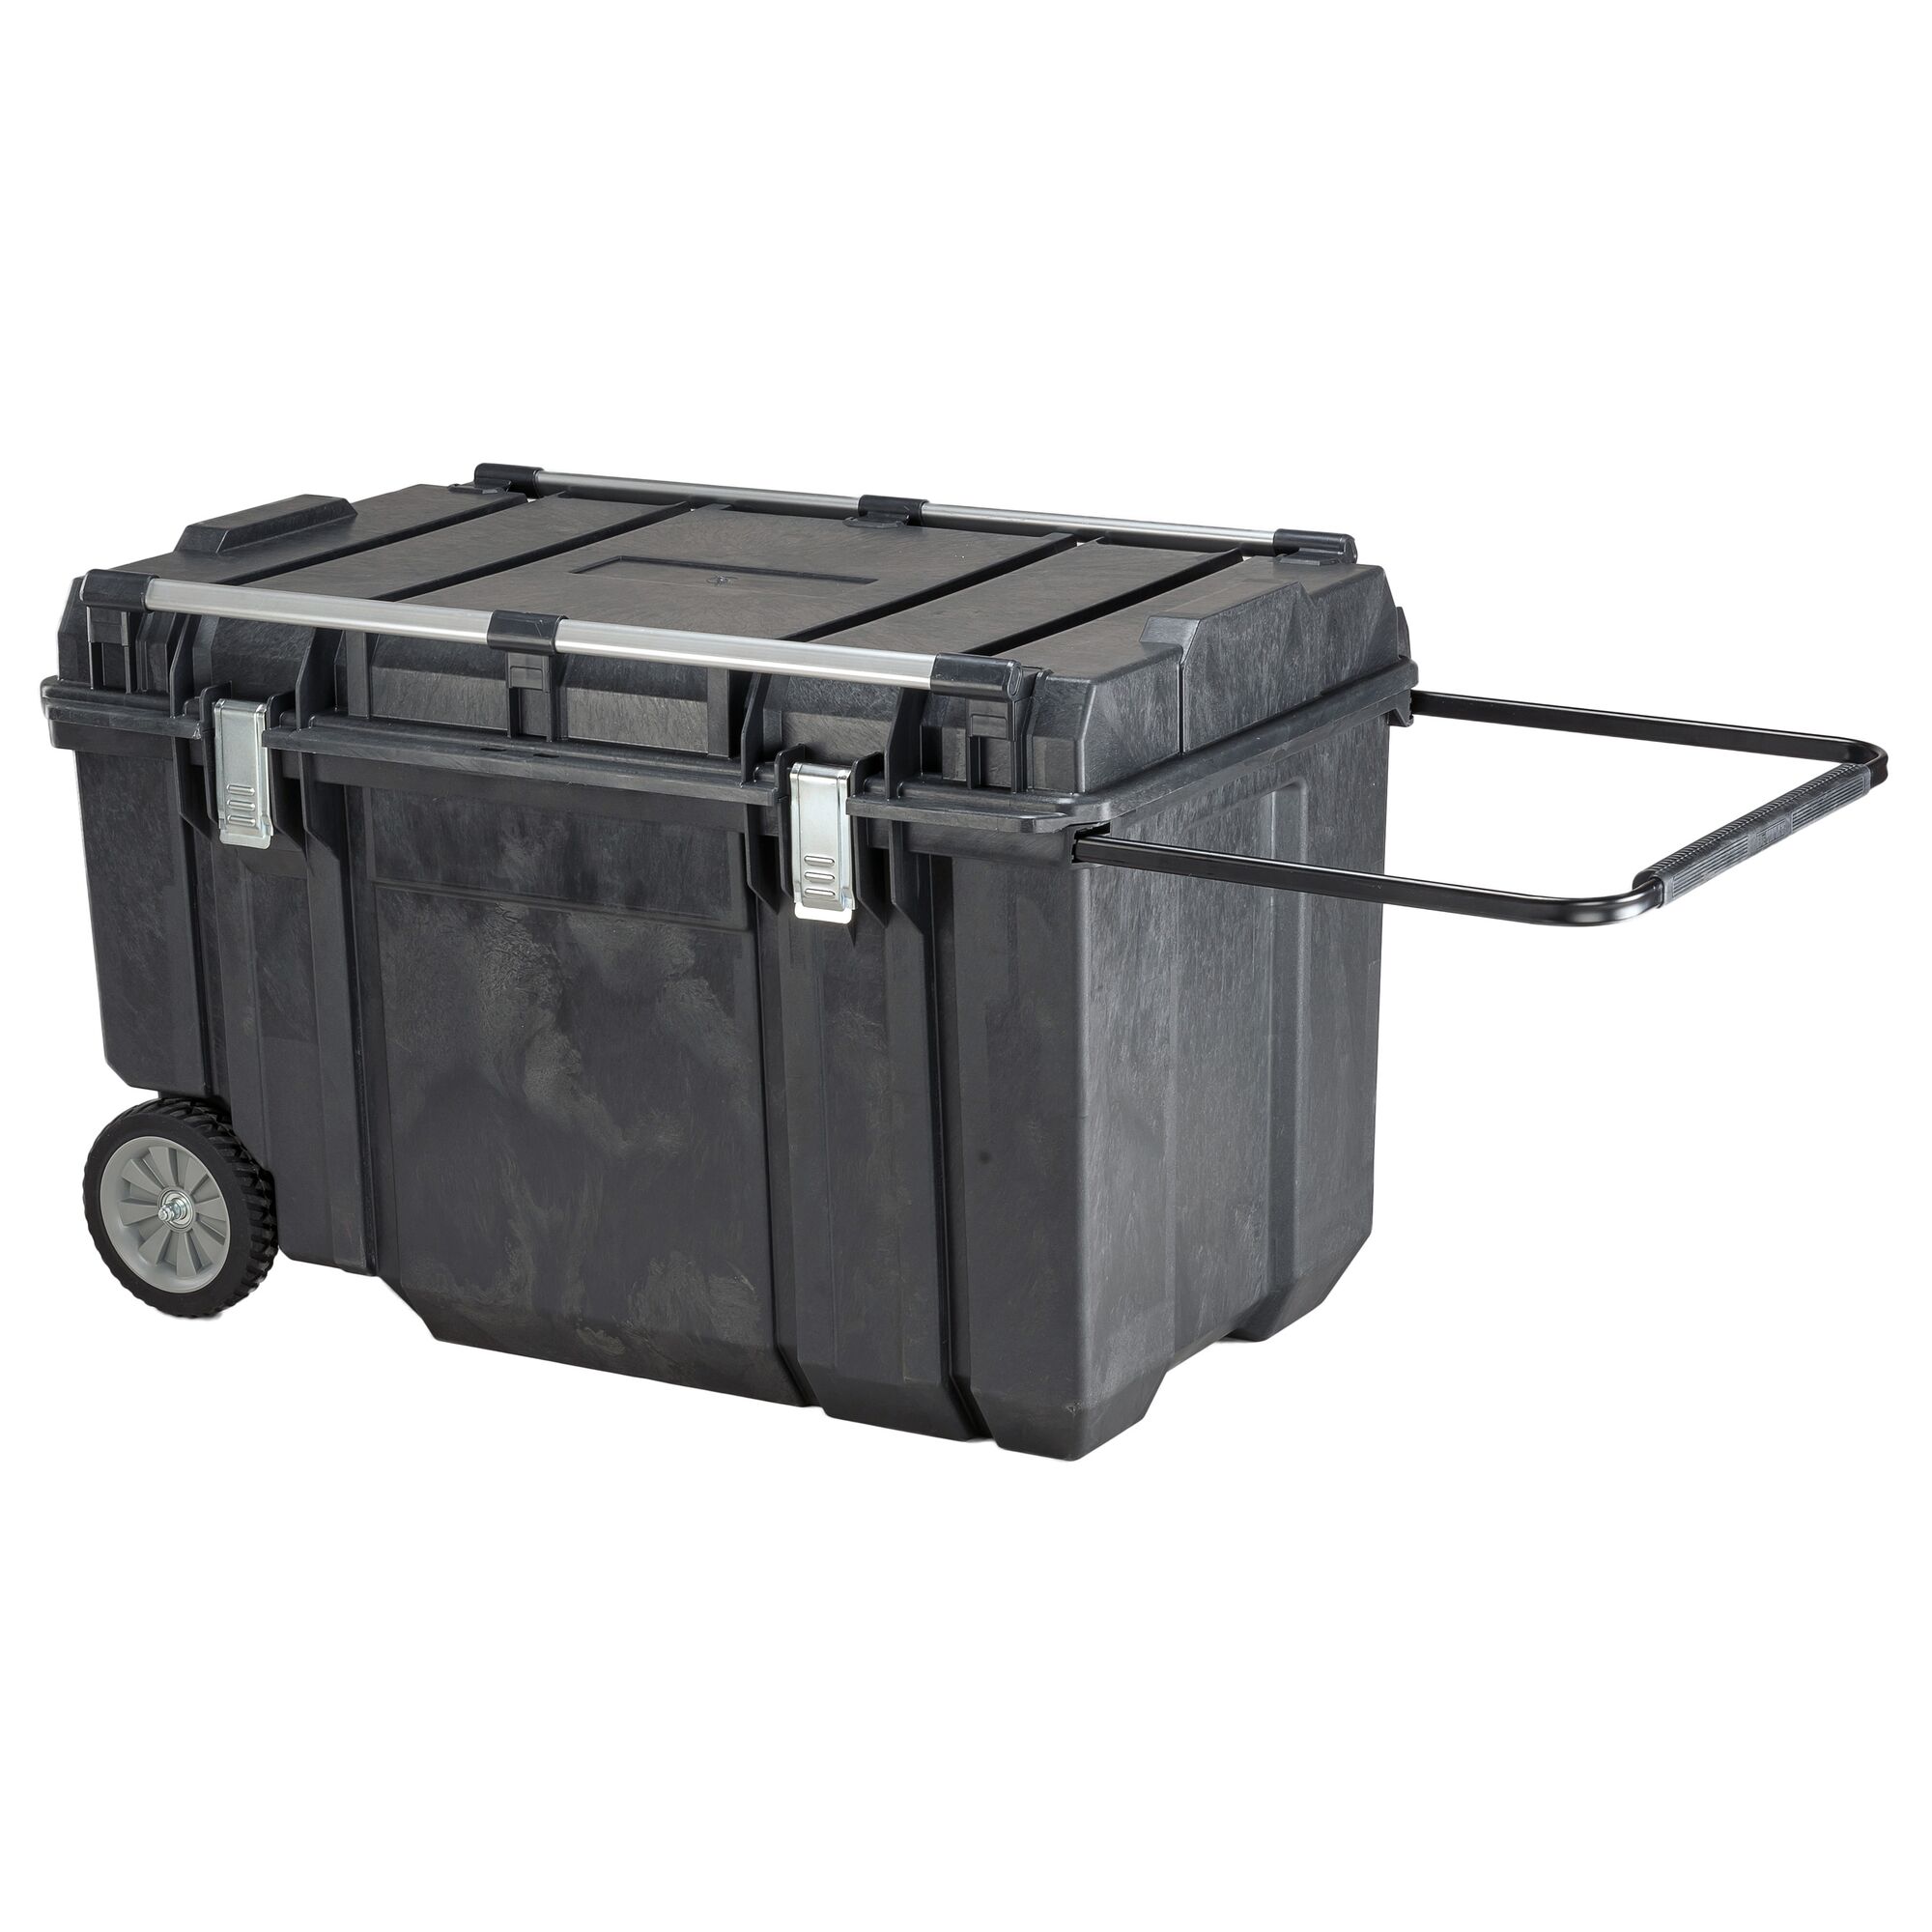 50 Gal Black Rolling Plastic Storage Tote with Pull Handle- Set of